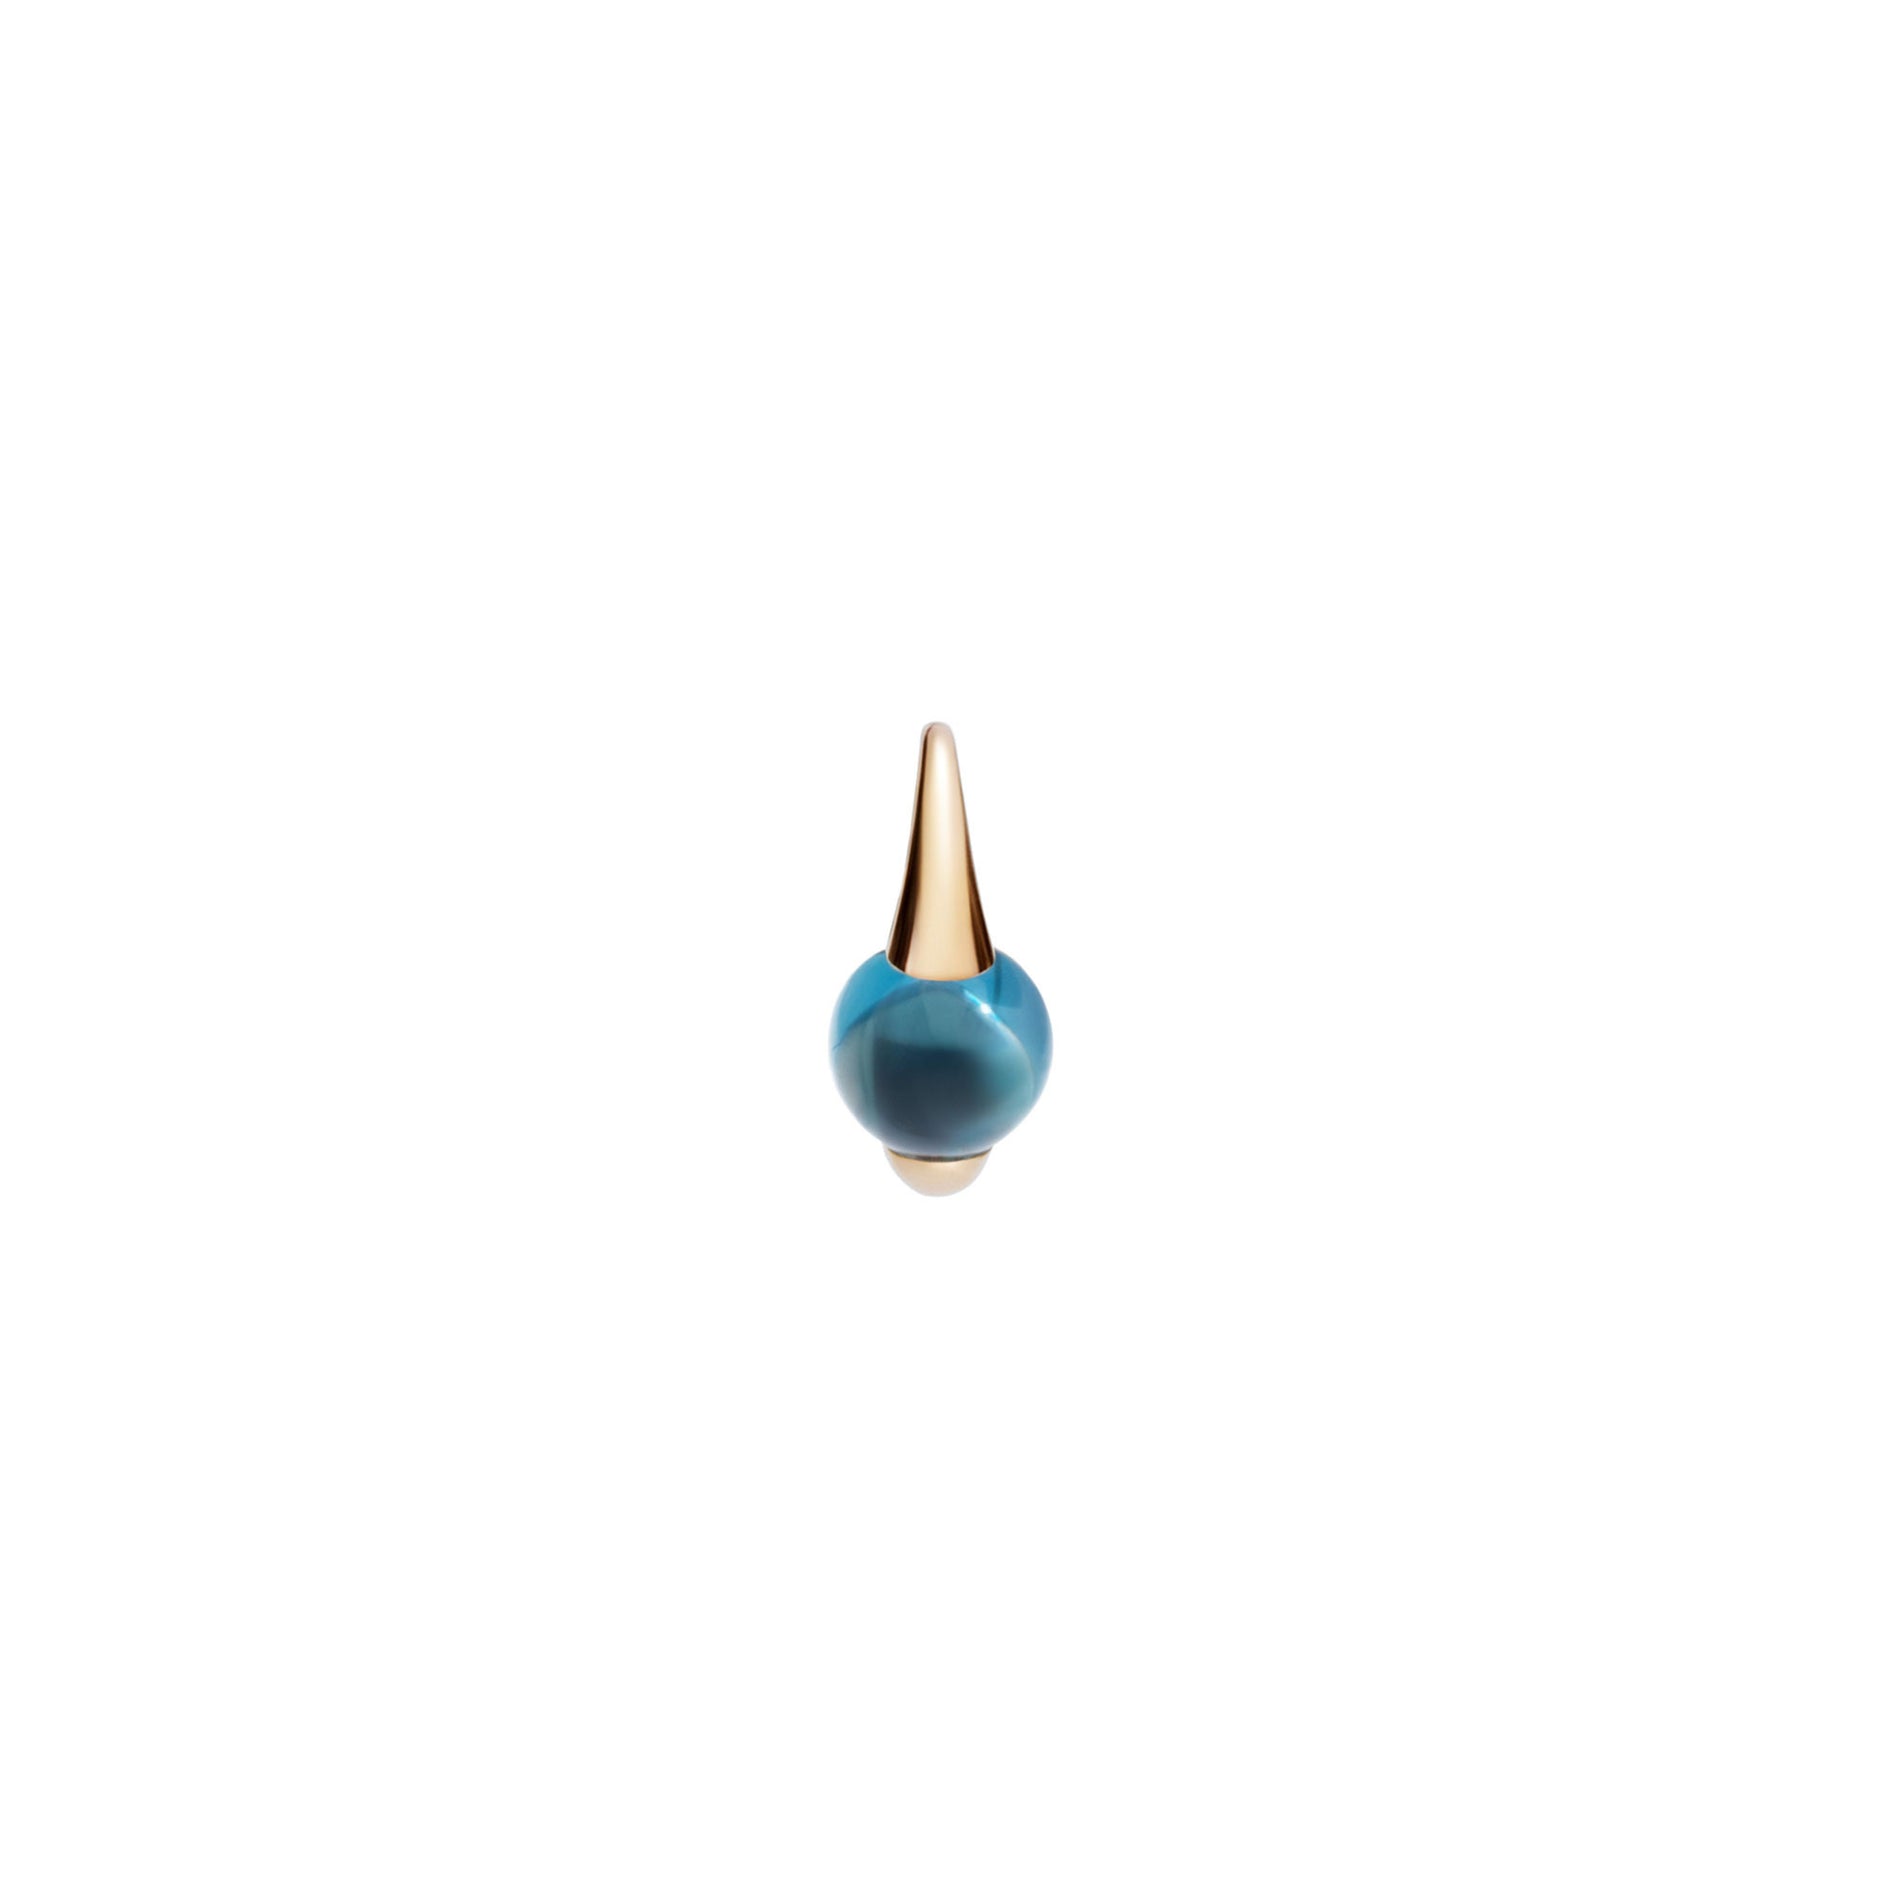 M'ama non M'ama Earrings in 18k Rose Gold with Chabochon London Blue Topaz - Orsini Jewellers NZ